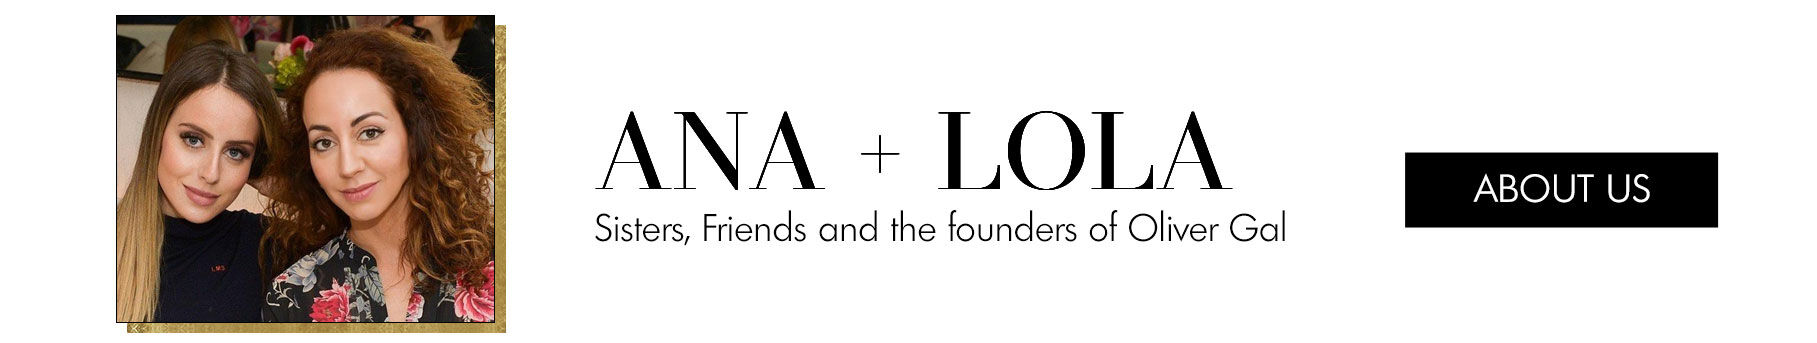 Art With Intention - from Founders and sisters Ana & Lola